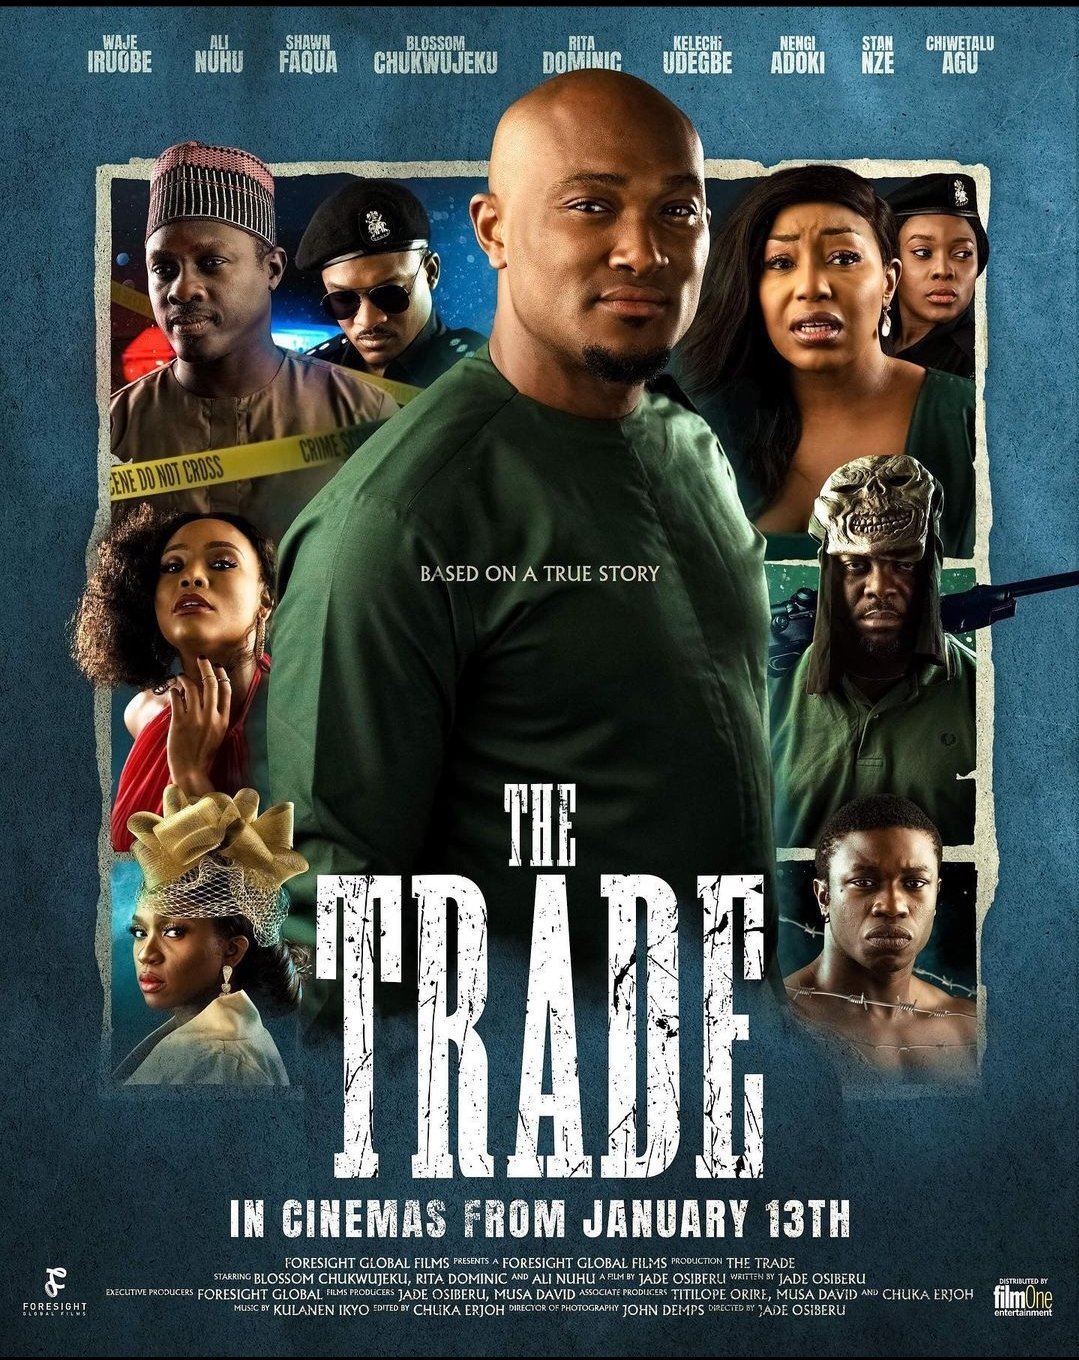 Nigerian trade - David Musa on Co- Producing “The Trade” Movie That Took 4 Years (Exclusive)